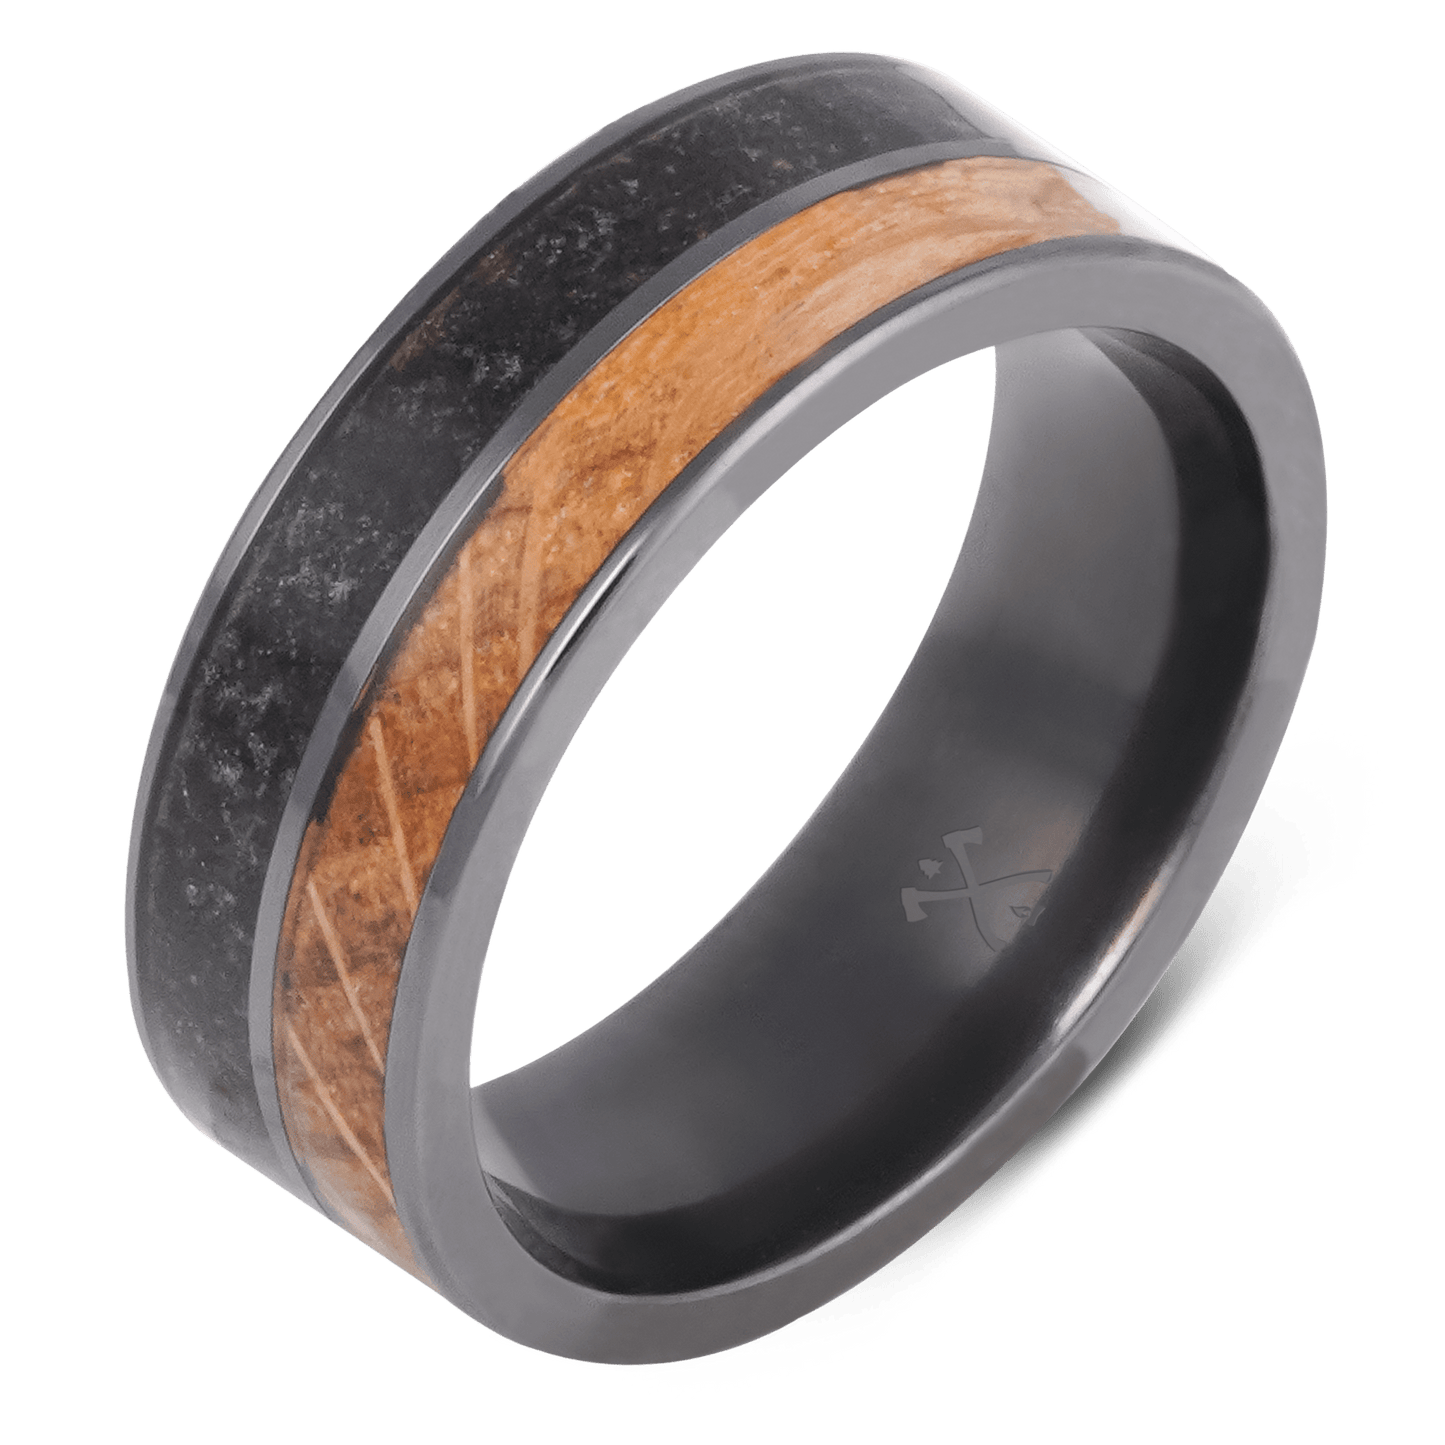 The Tennessee - Men's Wedding Rings - Manly Bands